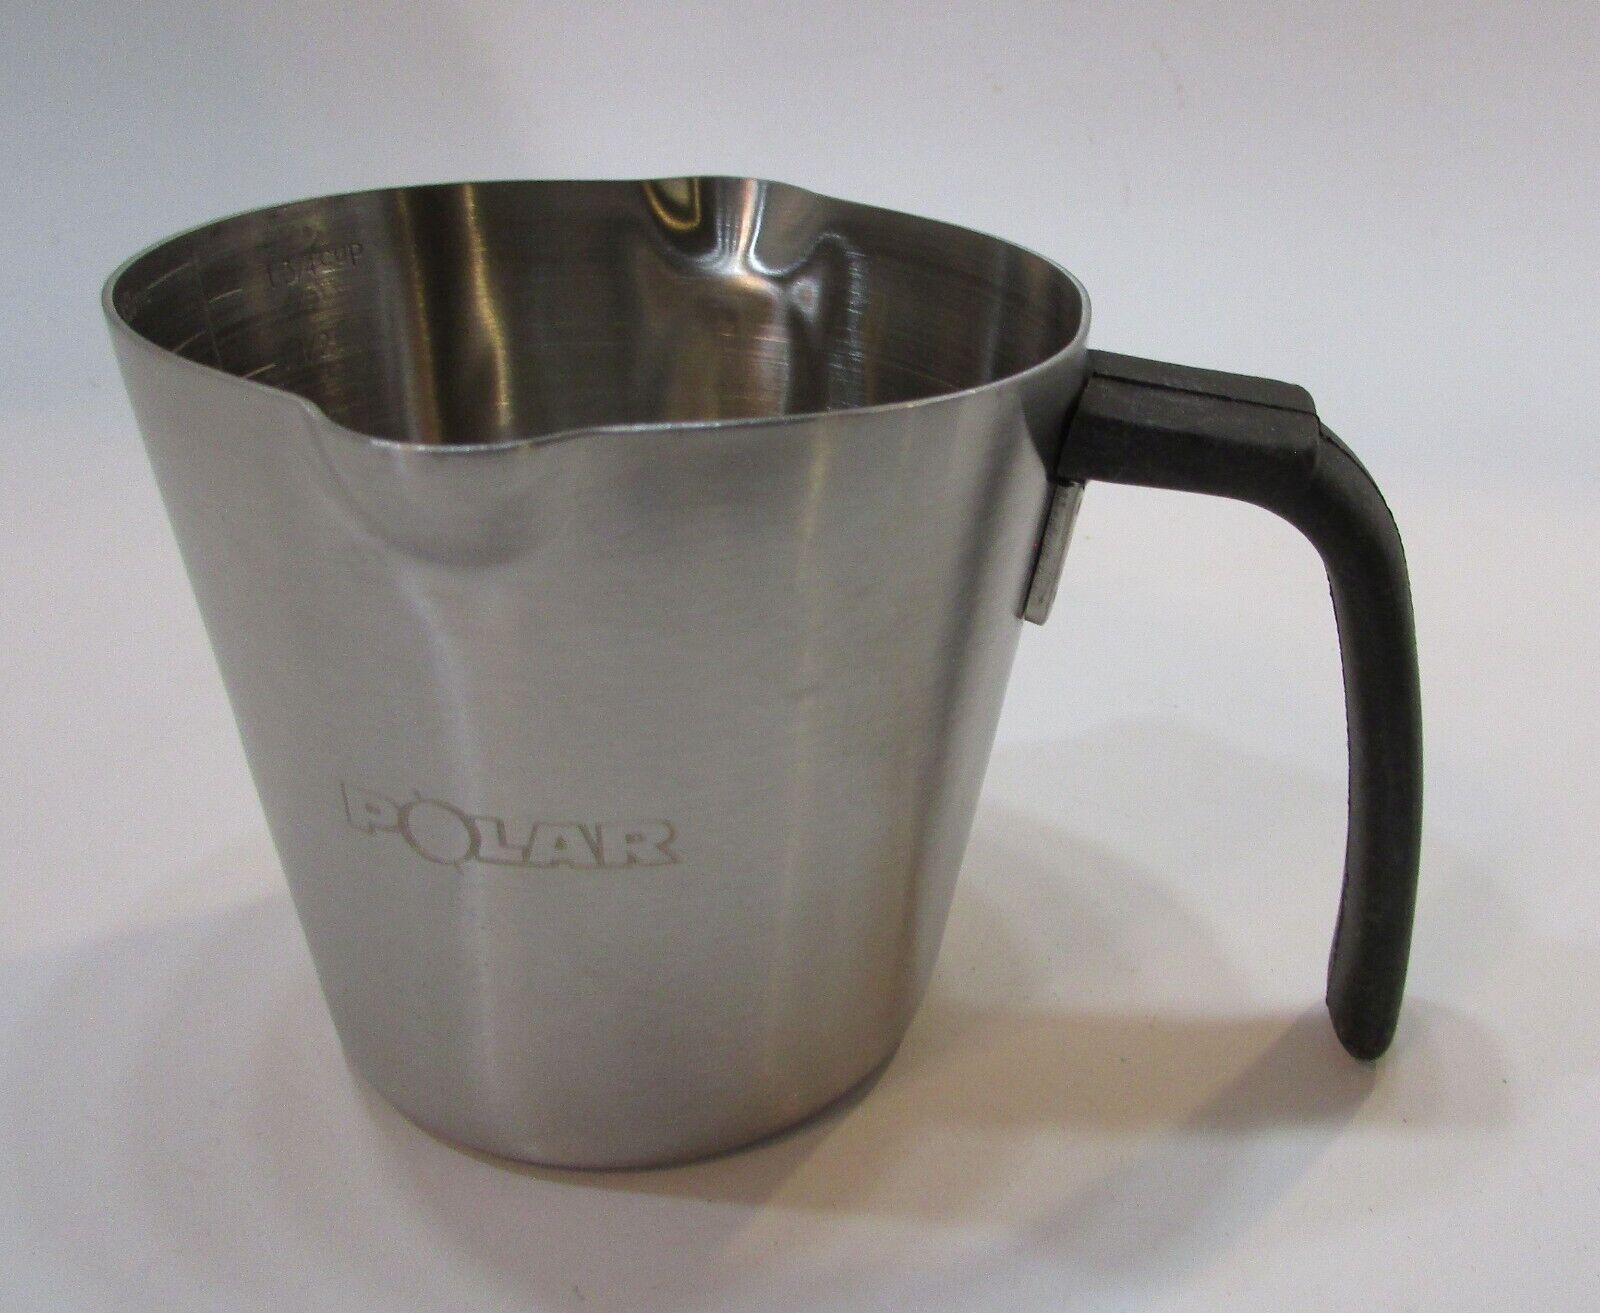 Vintage 1990's Polar Stainless Steel 1-3/4 Cup (450ml) Measuring Cup Pitcher